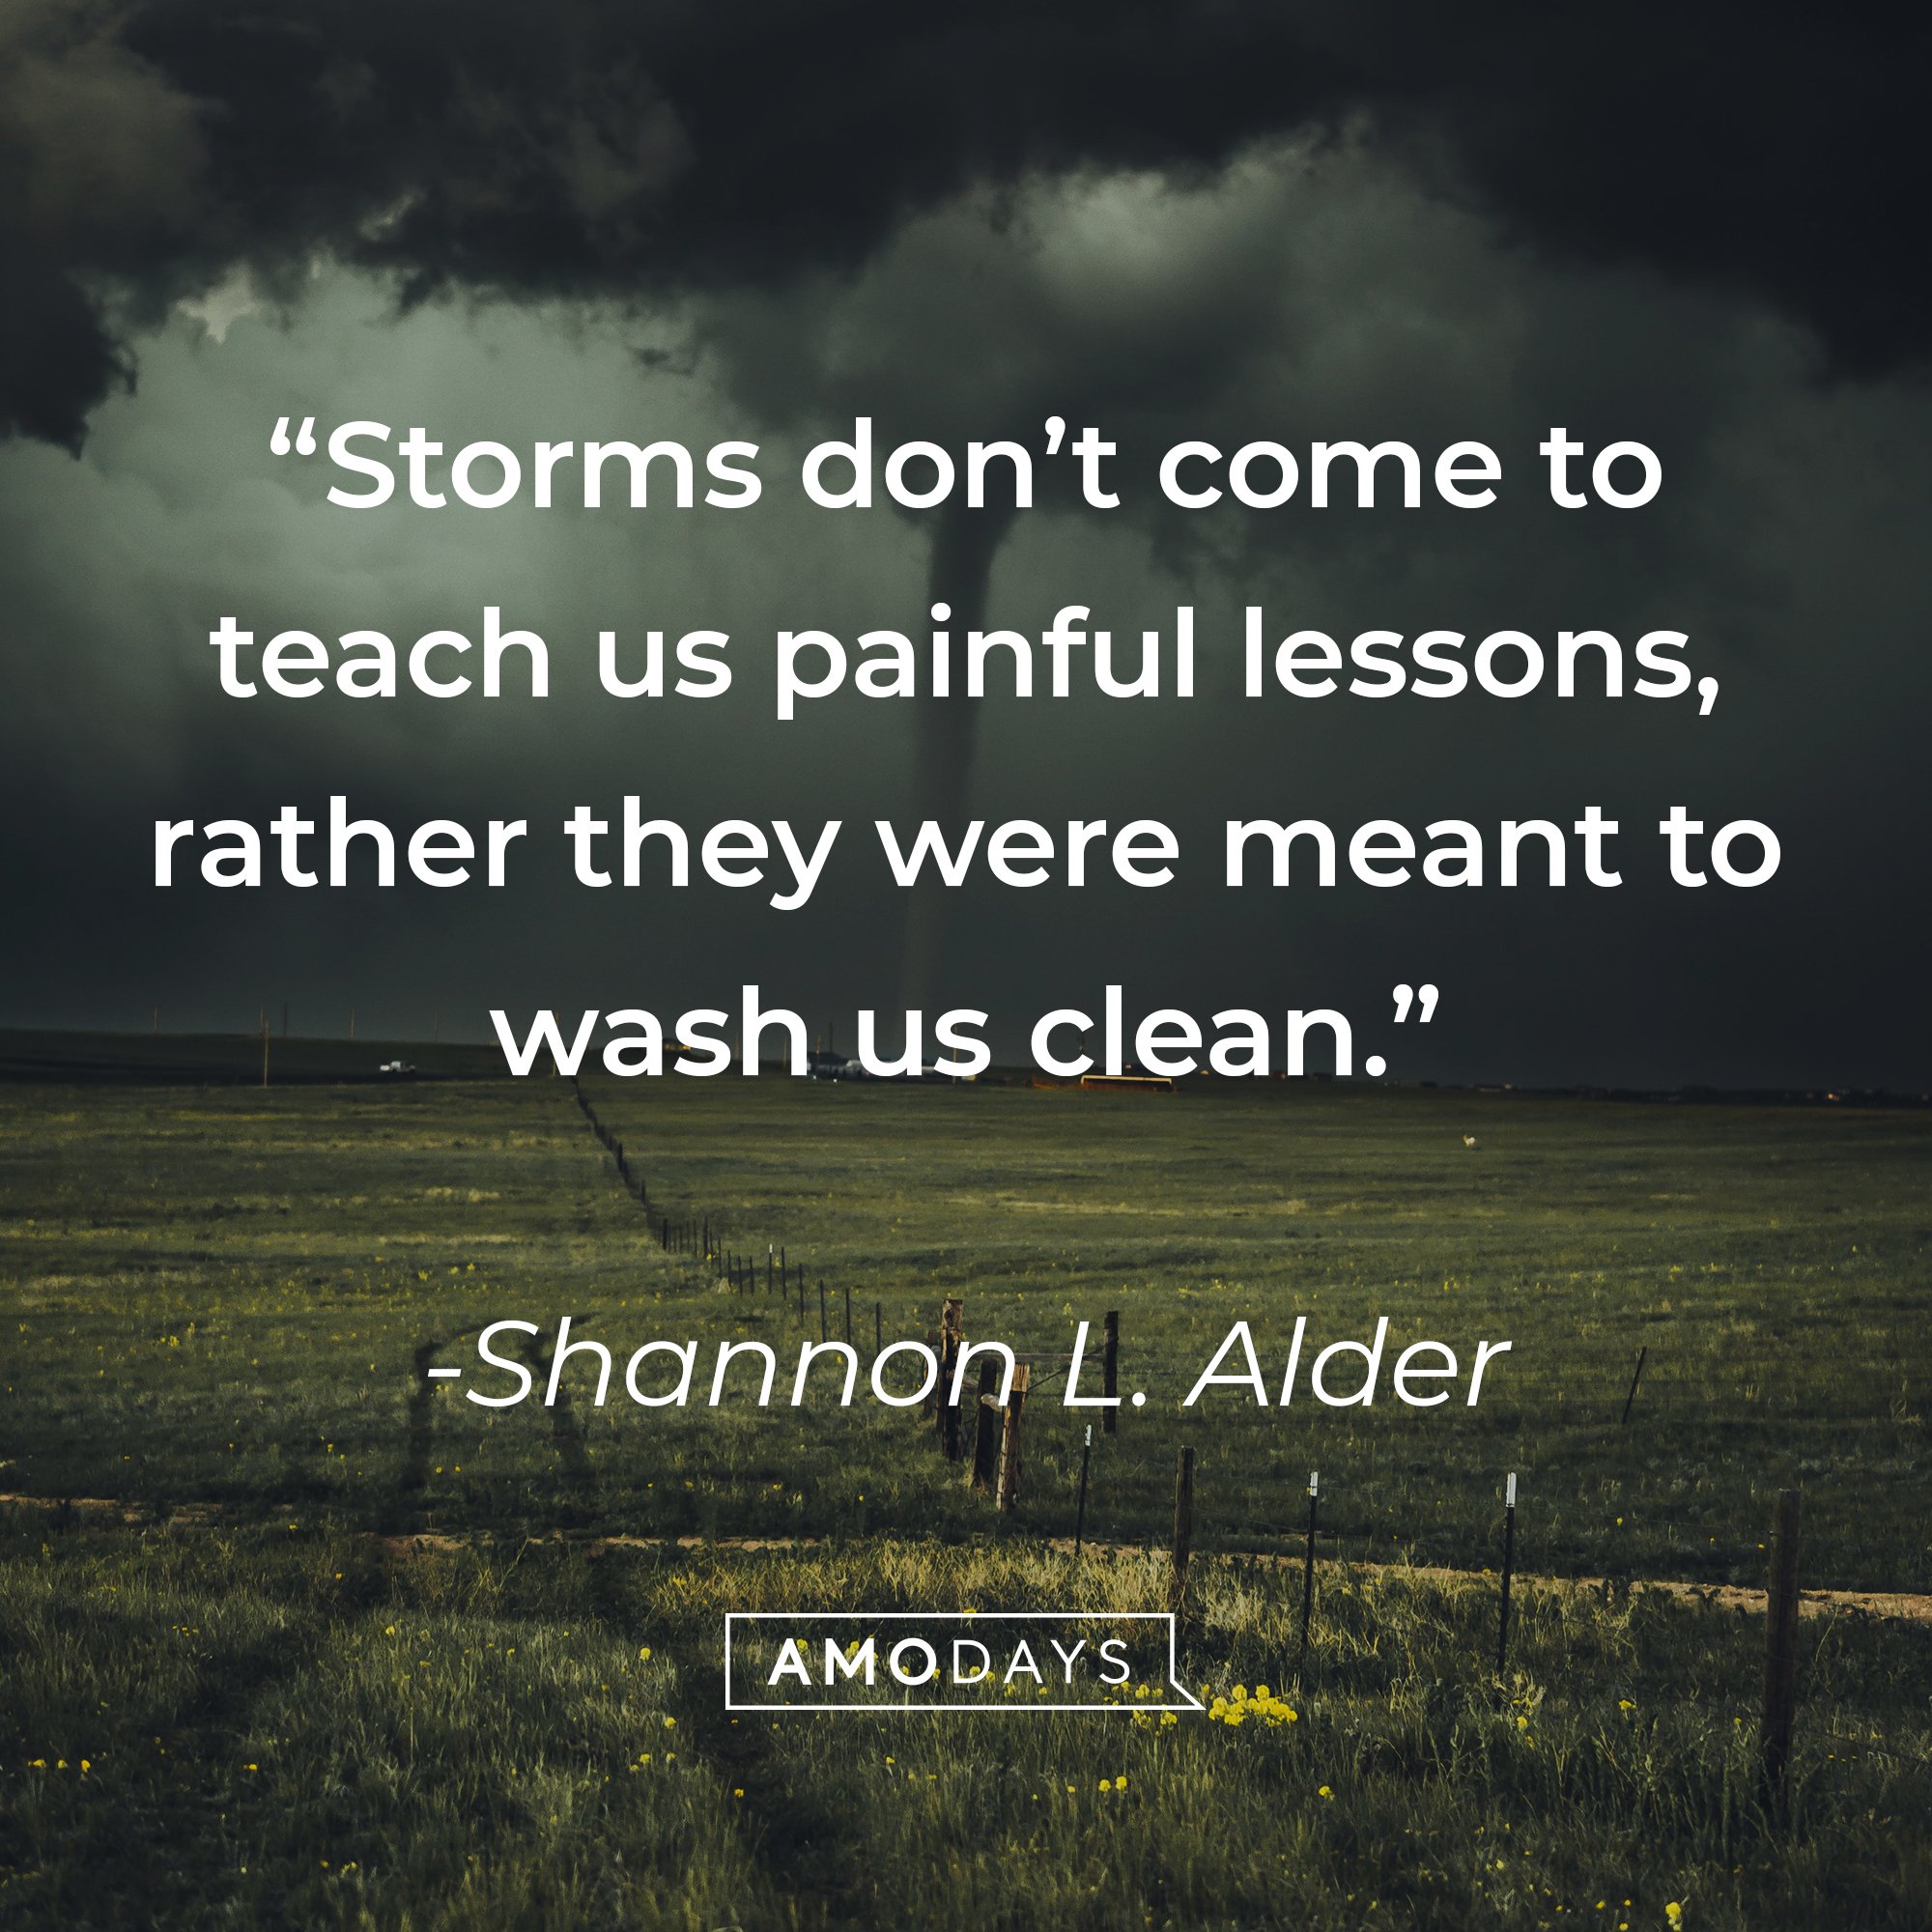 Shannon L. Alder’s quote: “Storms don’t come to teach us painful lessons, rather they were meant to wash us clean.” | Image: Amodays